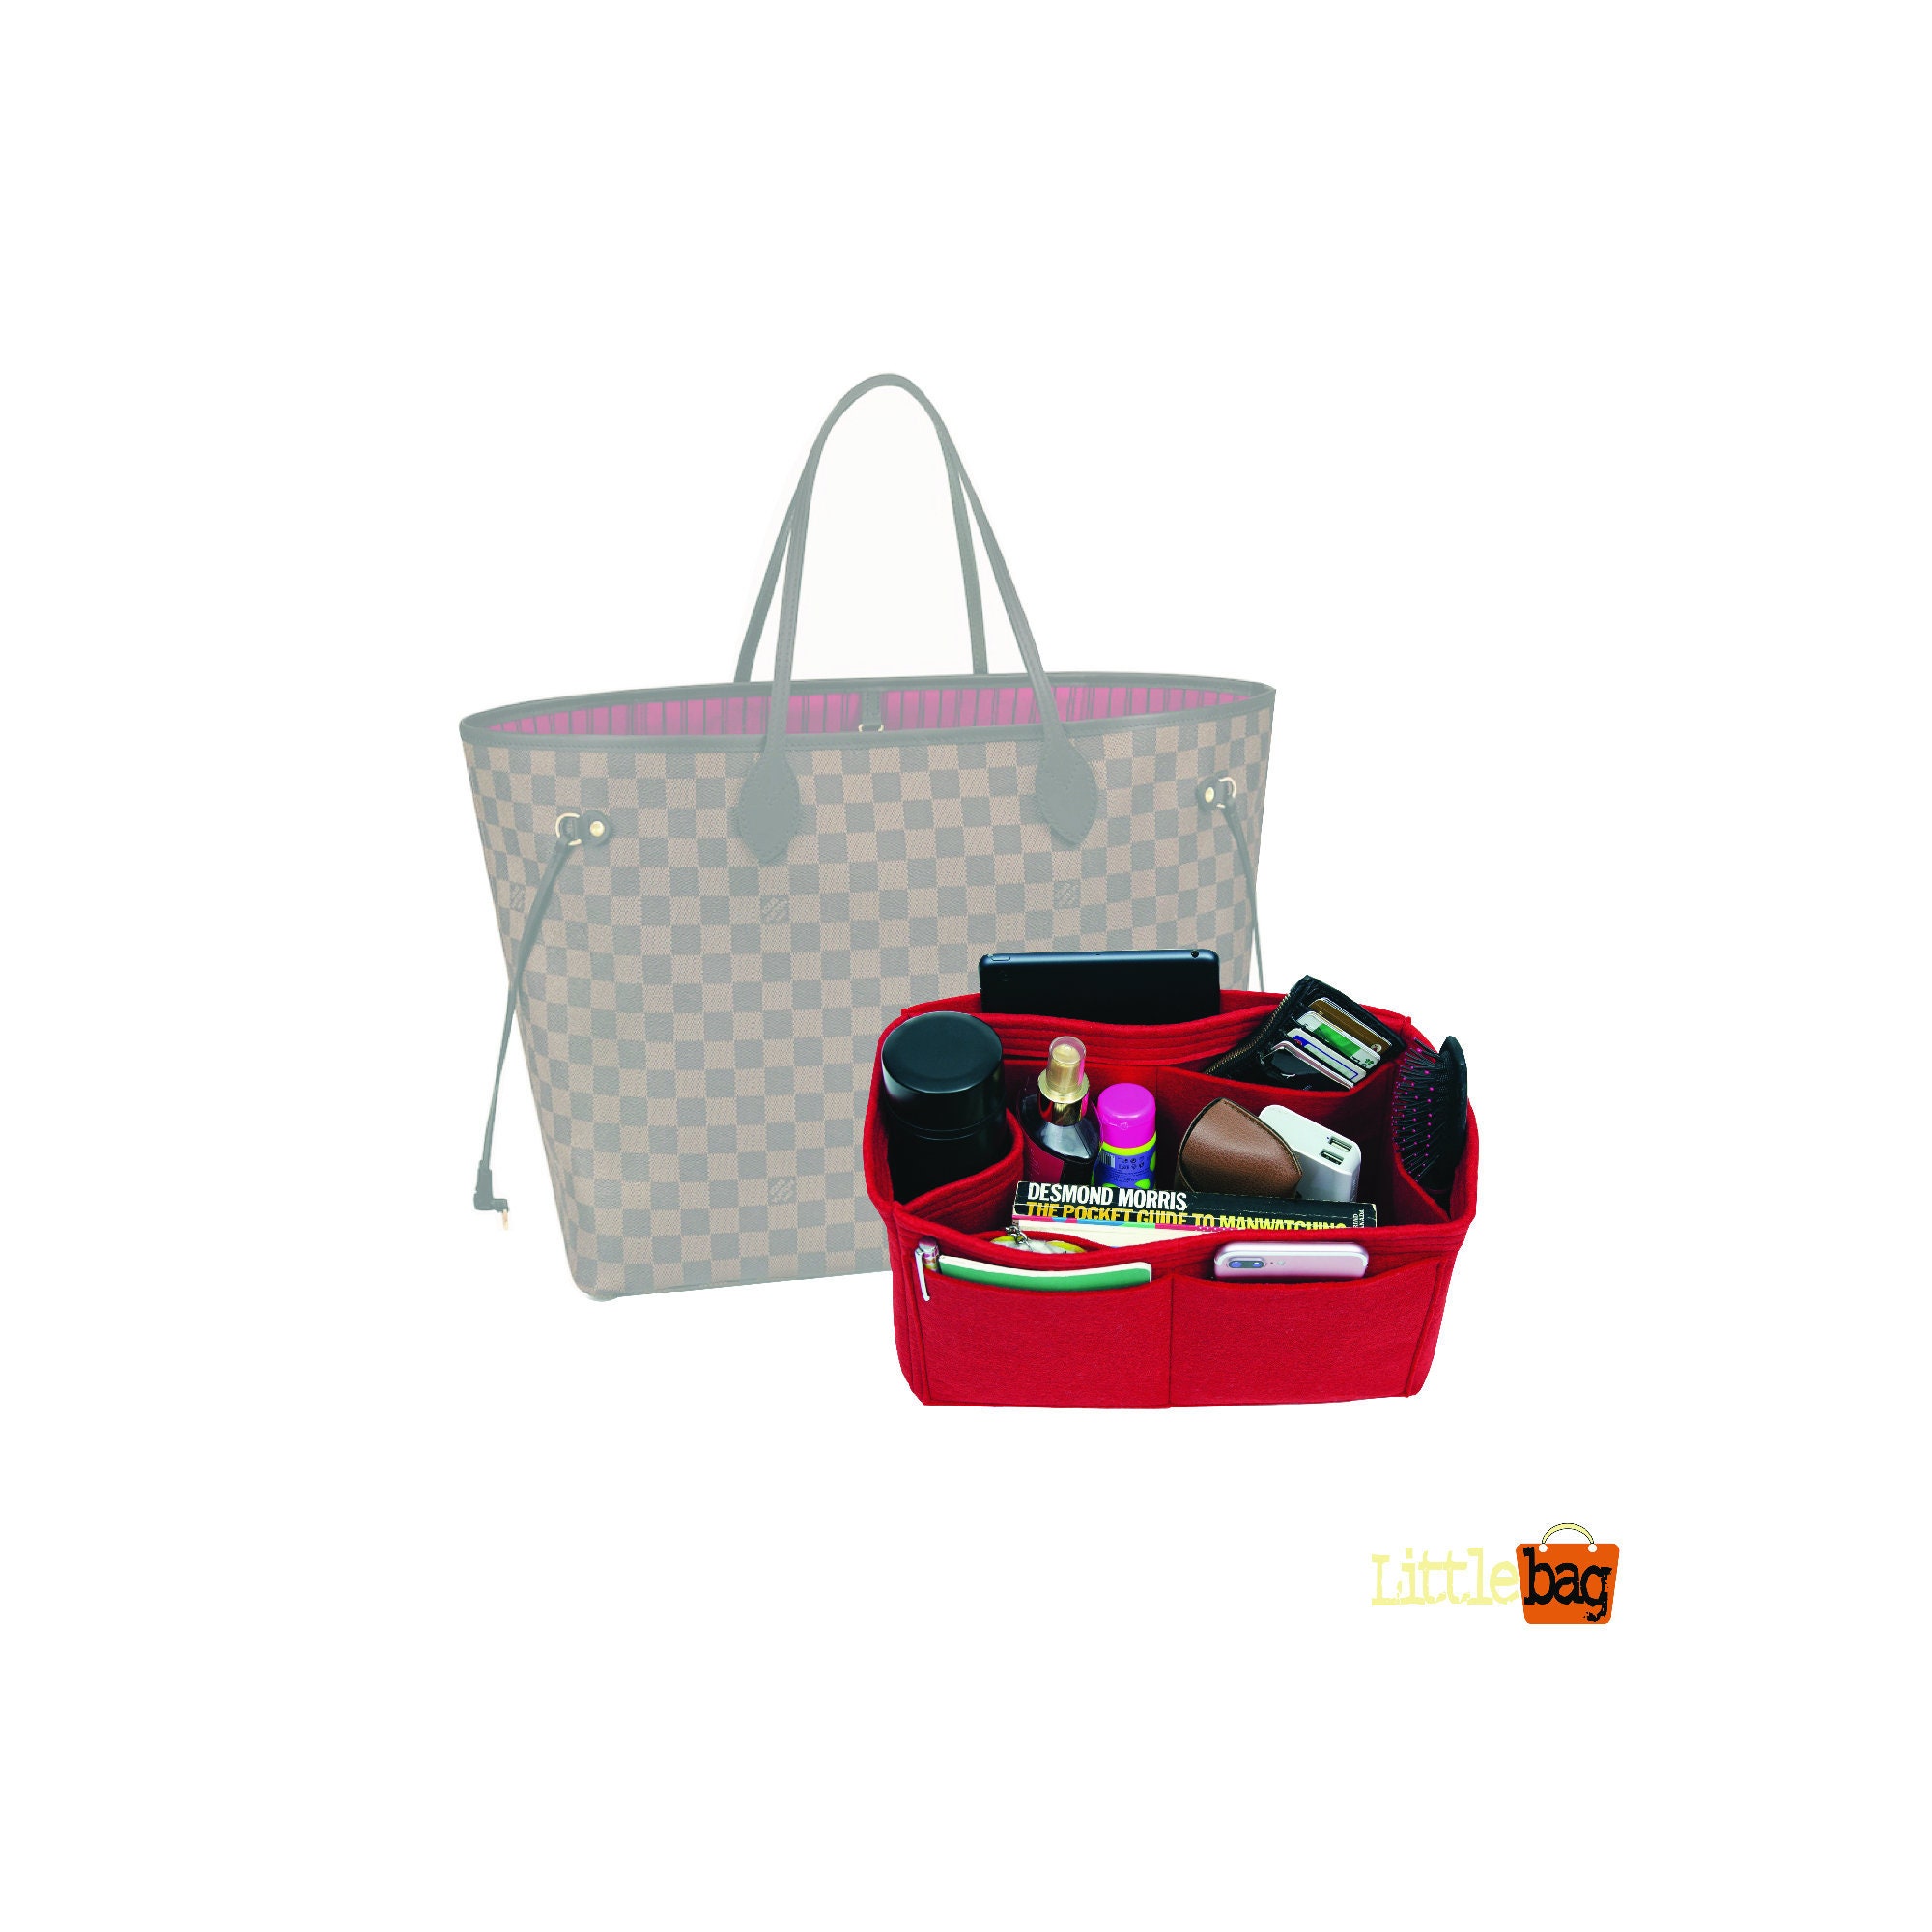 Tote Bag Organizer For Louis Vuitton Neverfull PM Bag with Single Bott